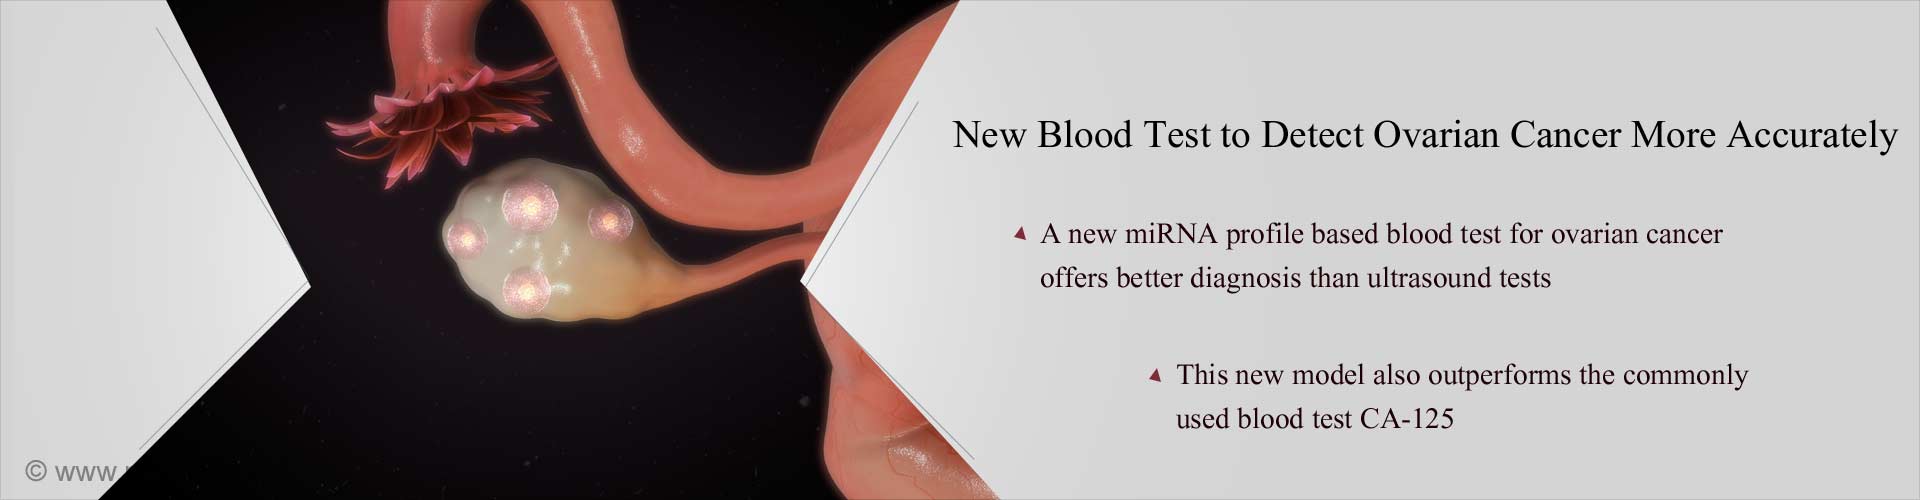 new blood test to detect ovarian cancer more accurately
- A new miRNA profile based blood test for ovarian cancer offers better diagnosis than ultrasound tests
- This new model also outperforms the commonly used blood test CA-125